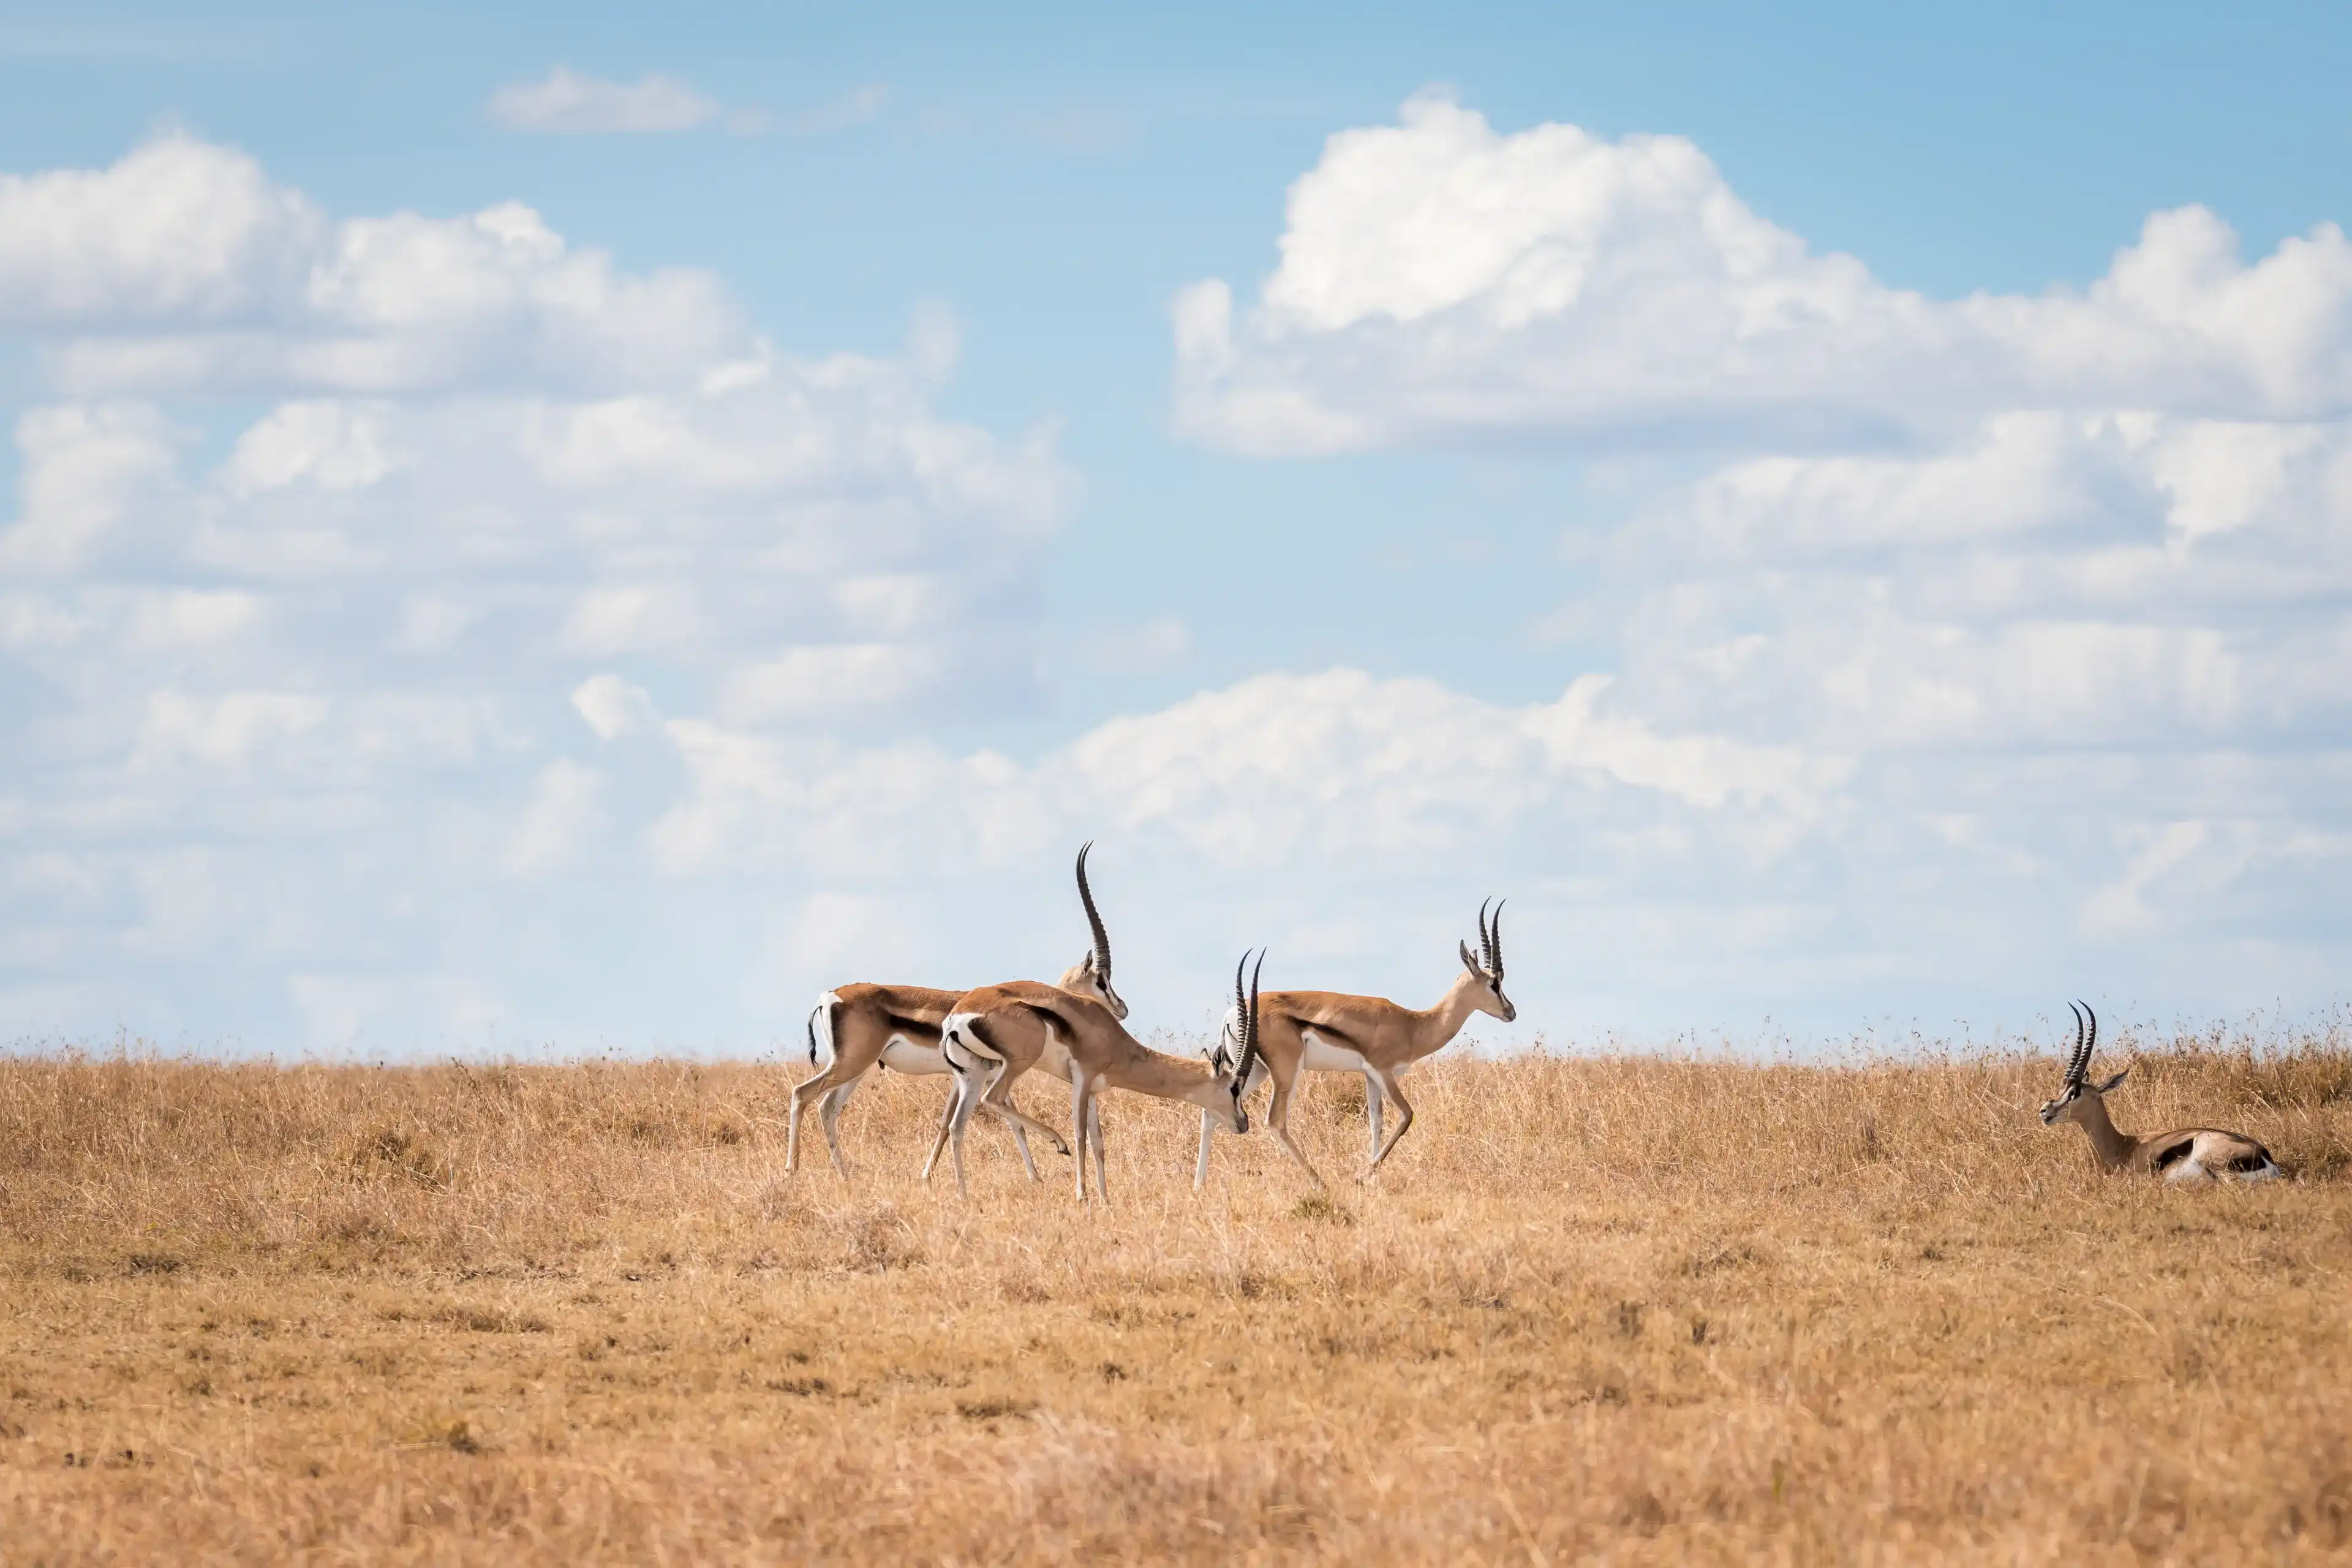 Four Grant's Gazelles on the savannah in Laikipia, Kenya, on a warm sunny day. Light blue sky with puffy white summer clouds create a sky meets earth background